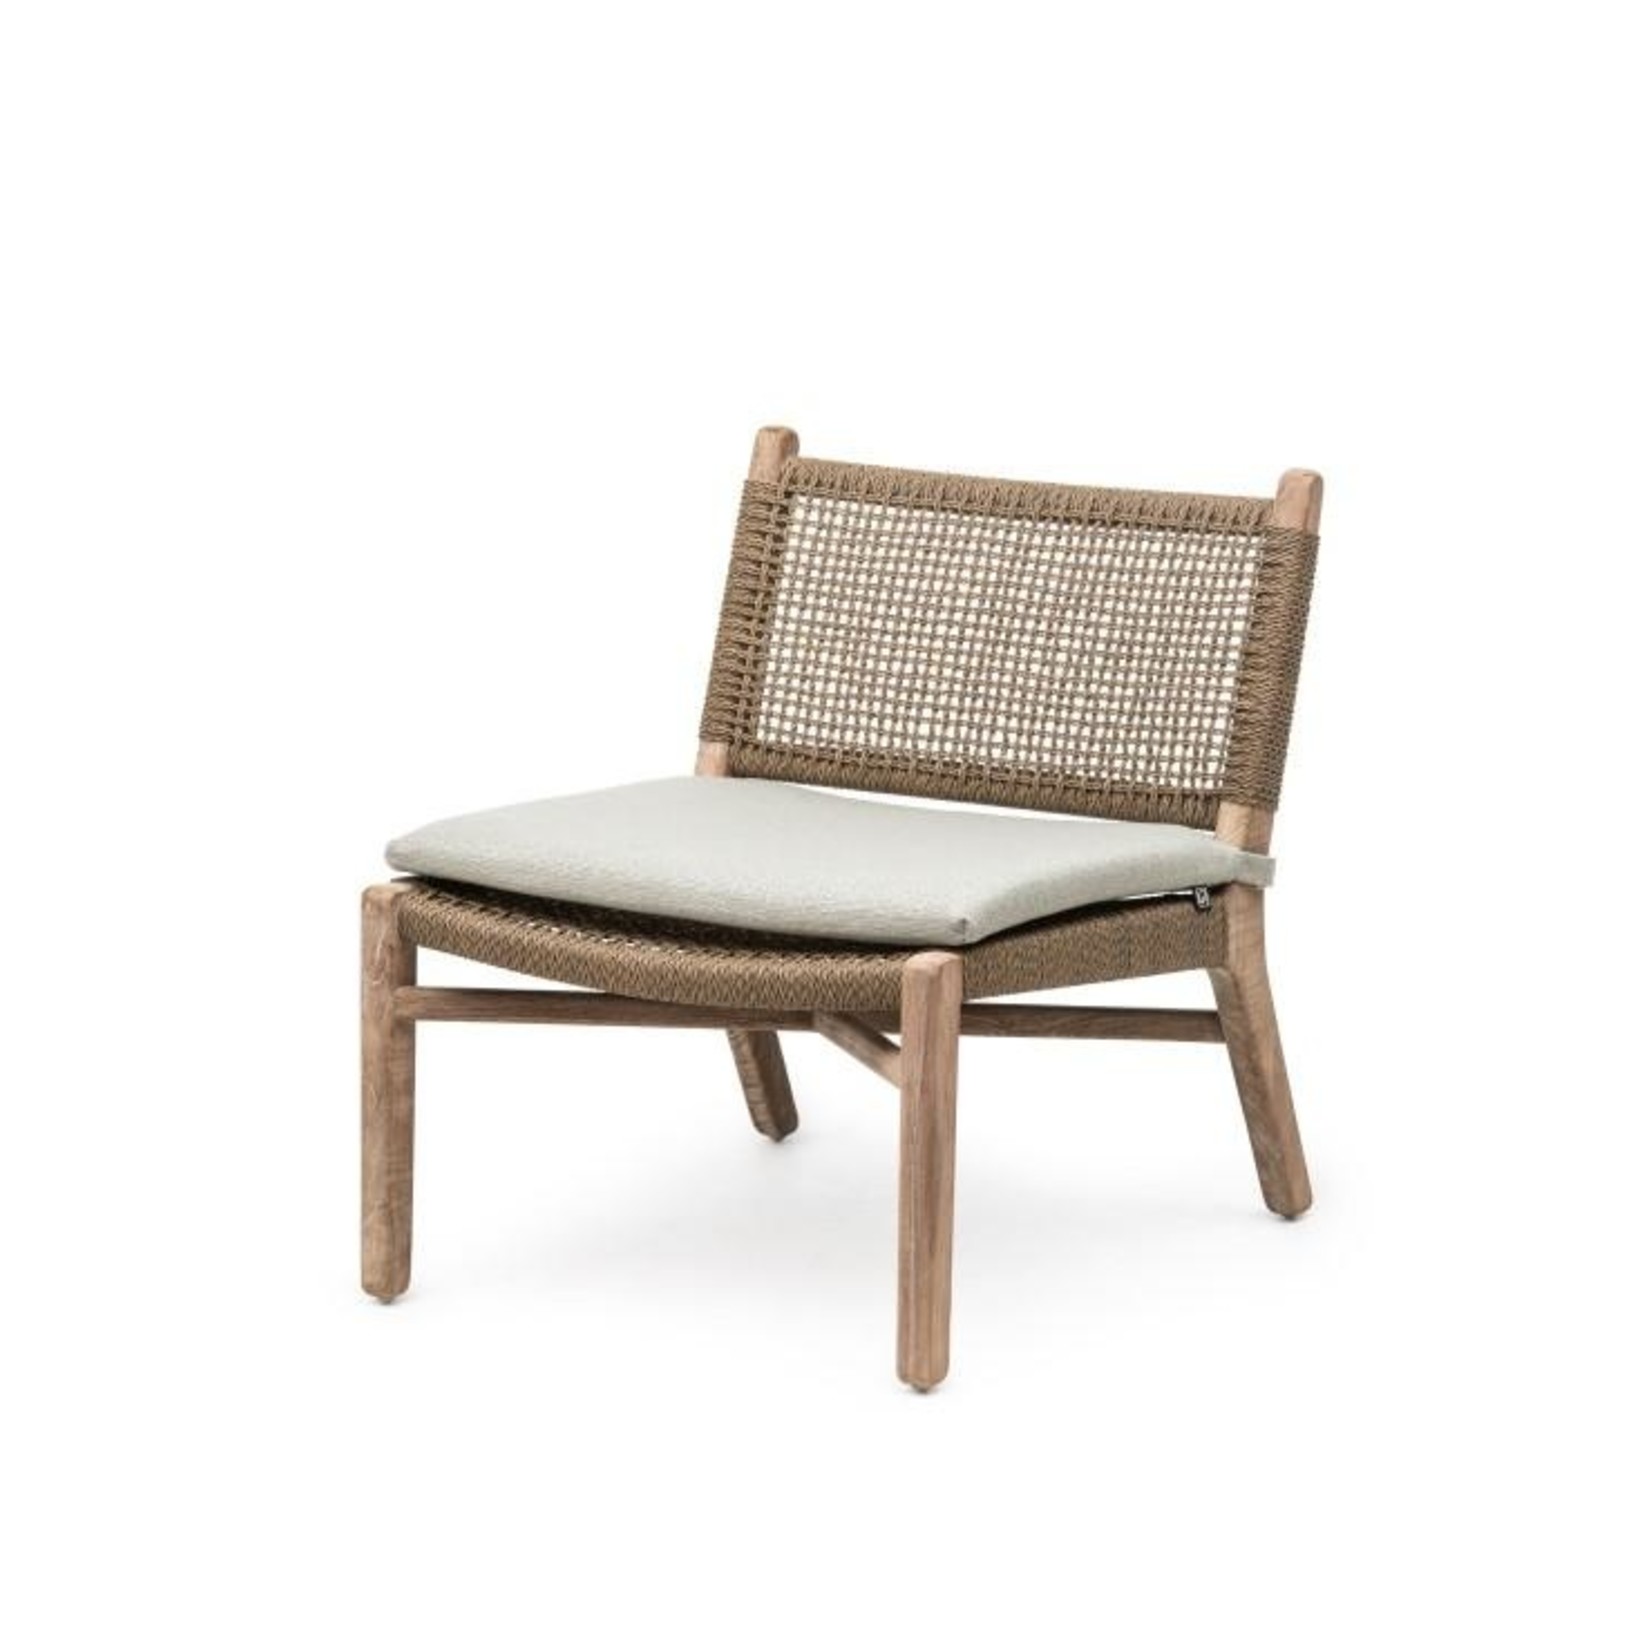 Gommaire Easy Chair Fiona | Teak Natural Grey / PE Wicker Antique Weed